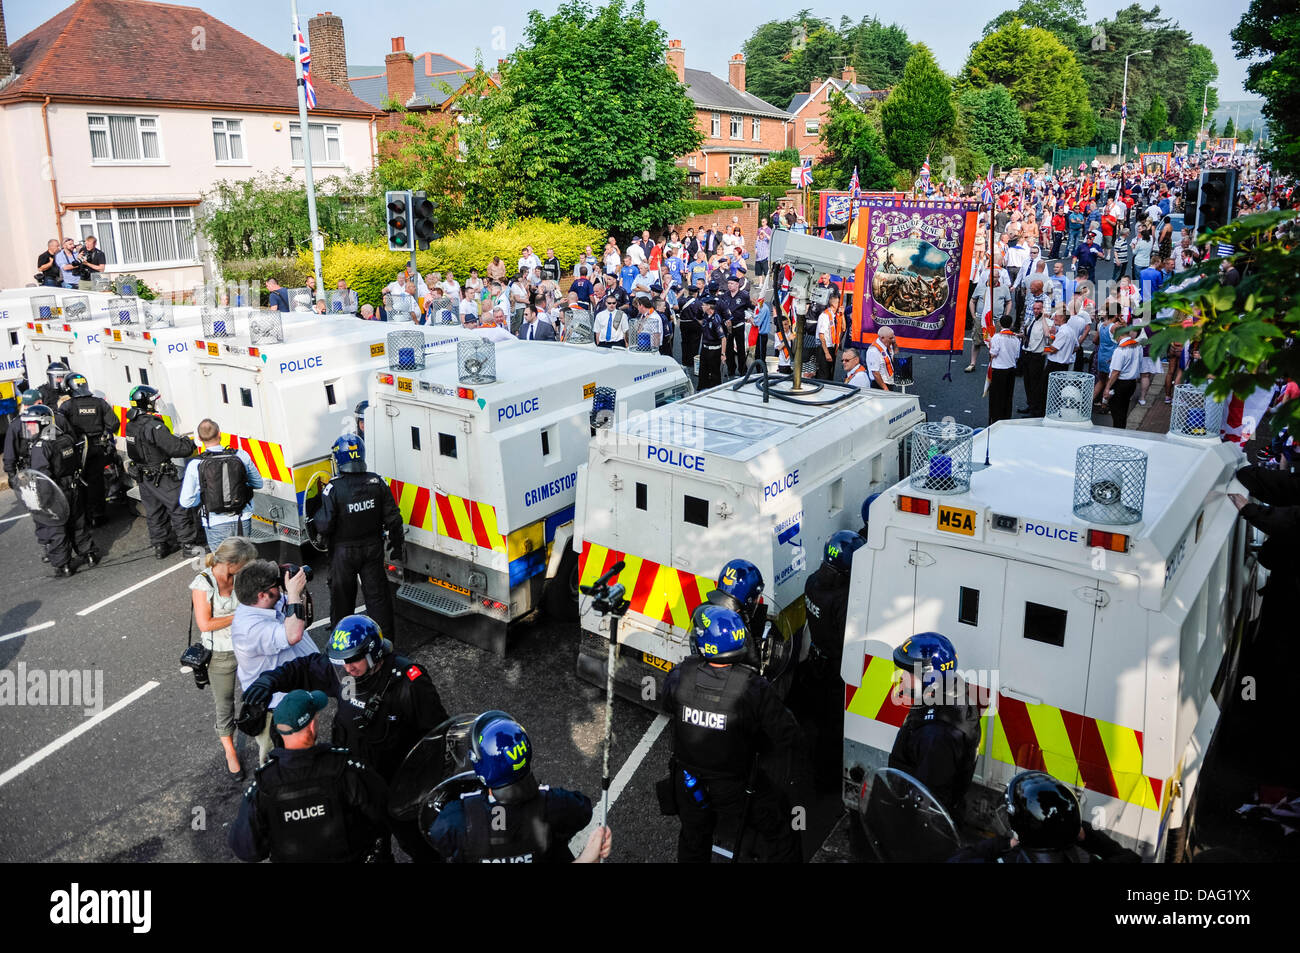 Belfast, Northern Ireland, 12th July 2013 - Hundreds of Orange Order members, bandsmen and supports are prevented from proceeding by PSNI armoured Landrovers and officers in riot gear. Stock Photo